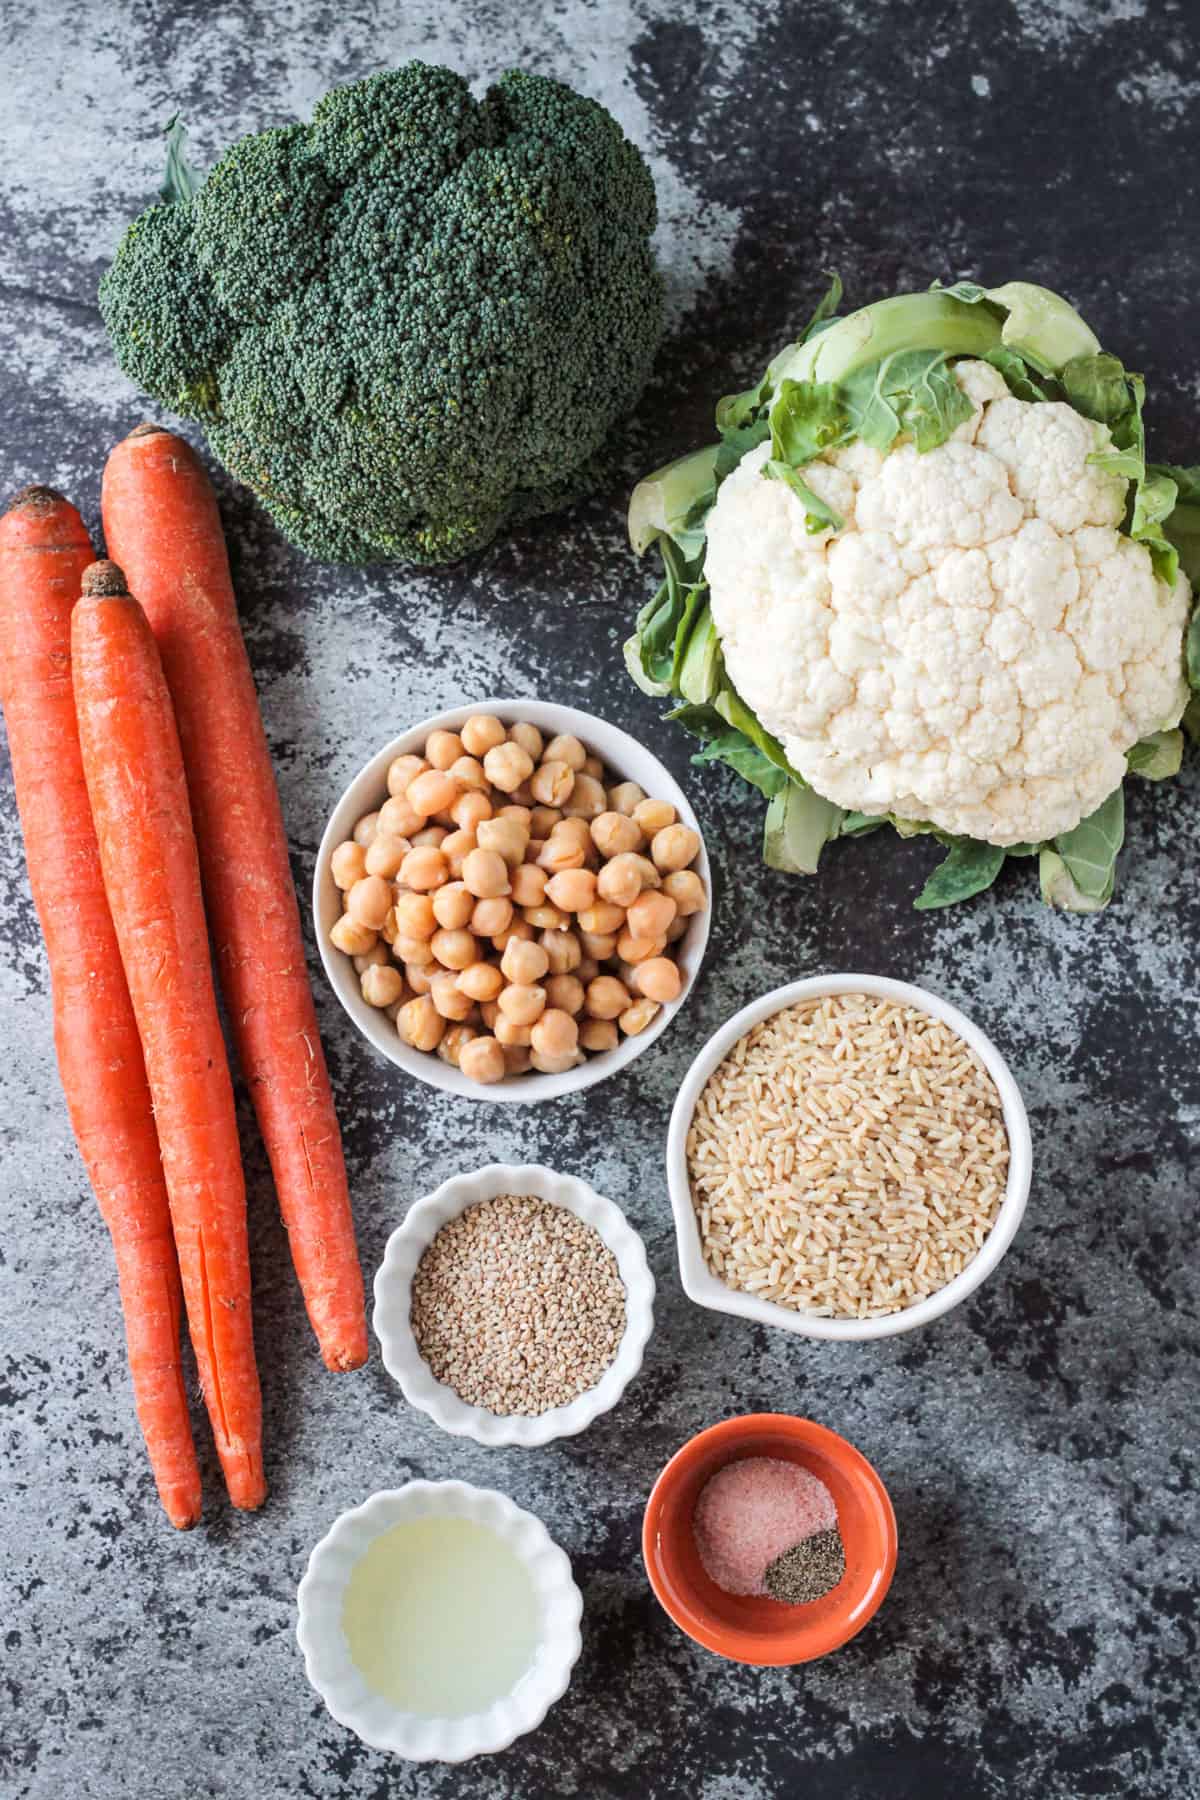 Individual ingredient components of a vegan buddha bowl.